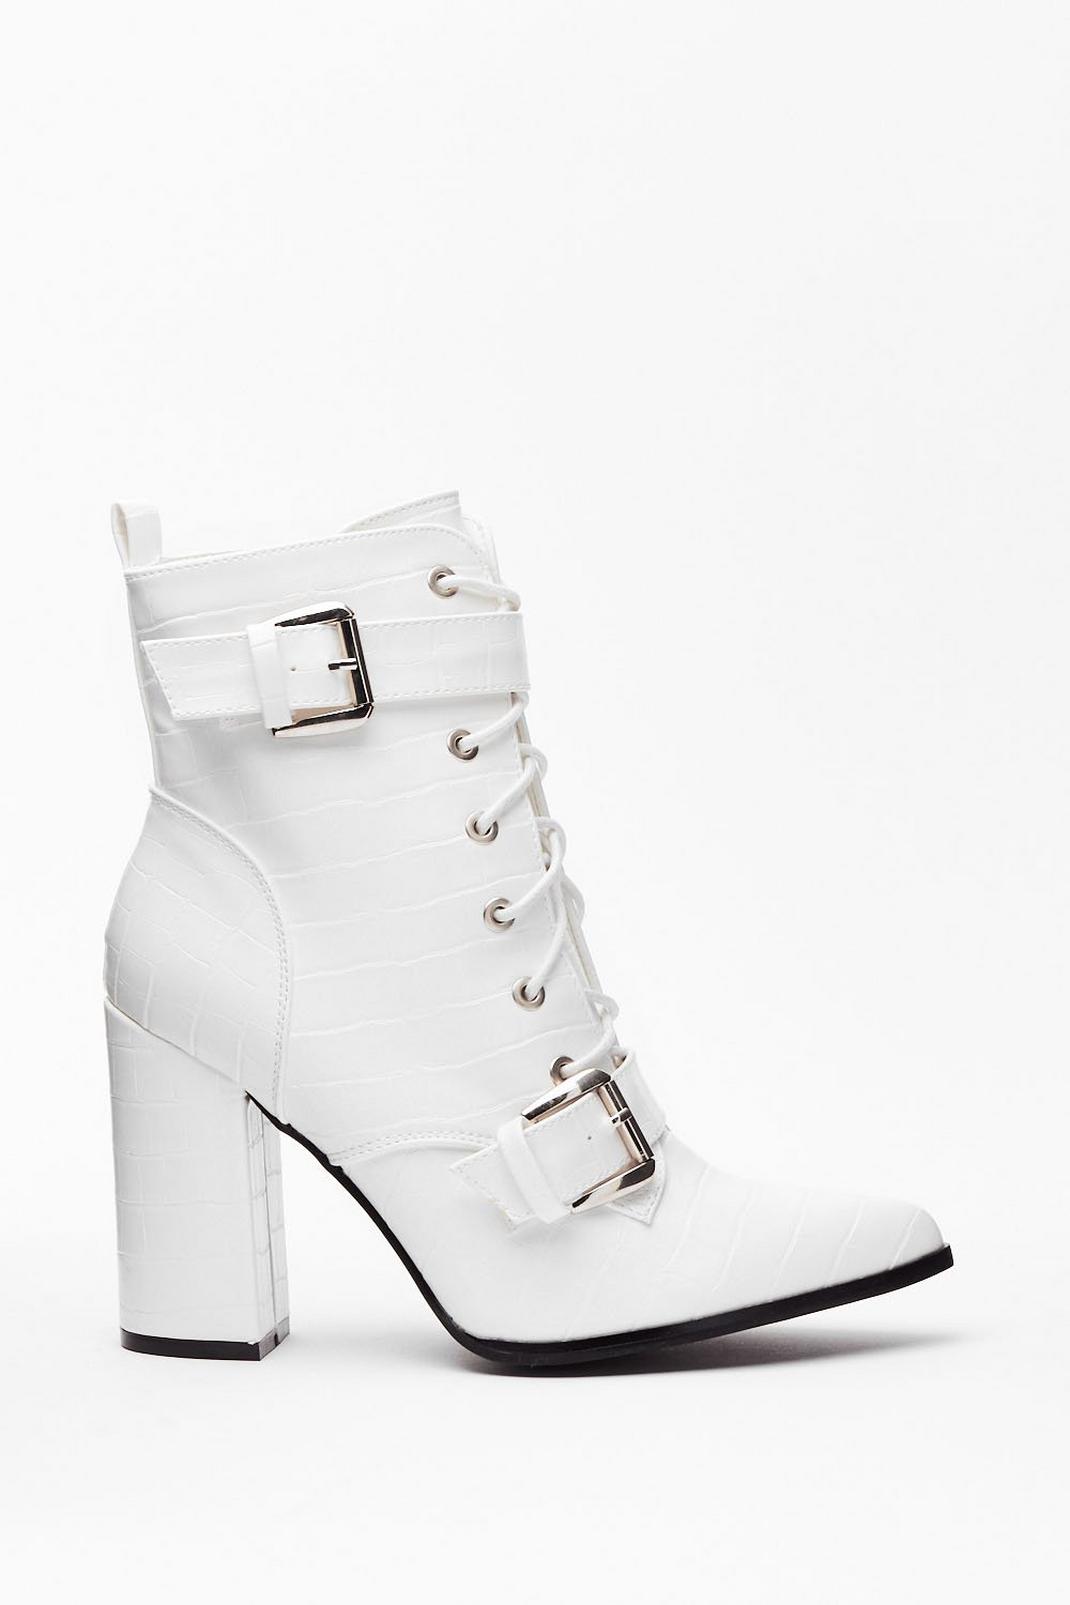 White Croc's On the Agenda Faux Leather Heeled Boots image number 1